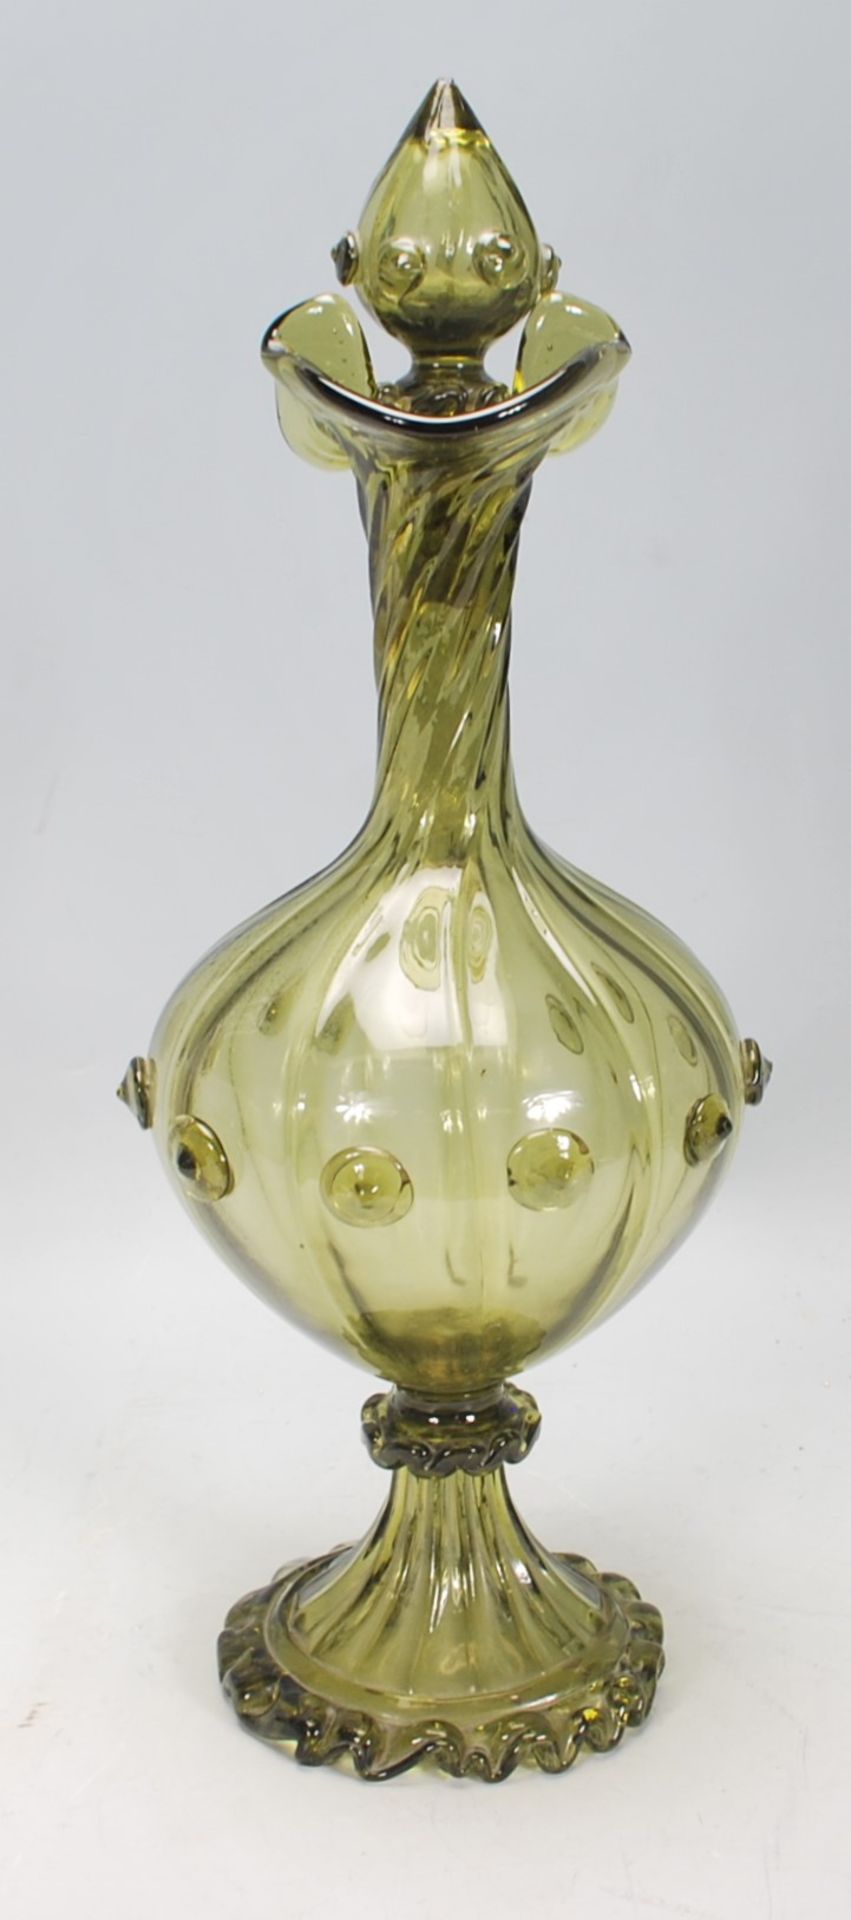 A 20th Century Murano green glass ewer jug having a reeded bulbous form body with a twisted neck, - Image 6 of 6